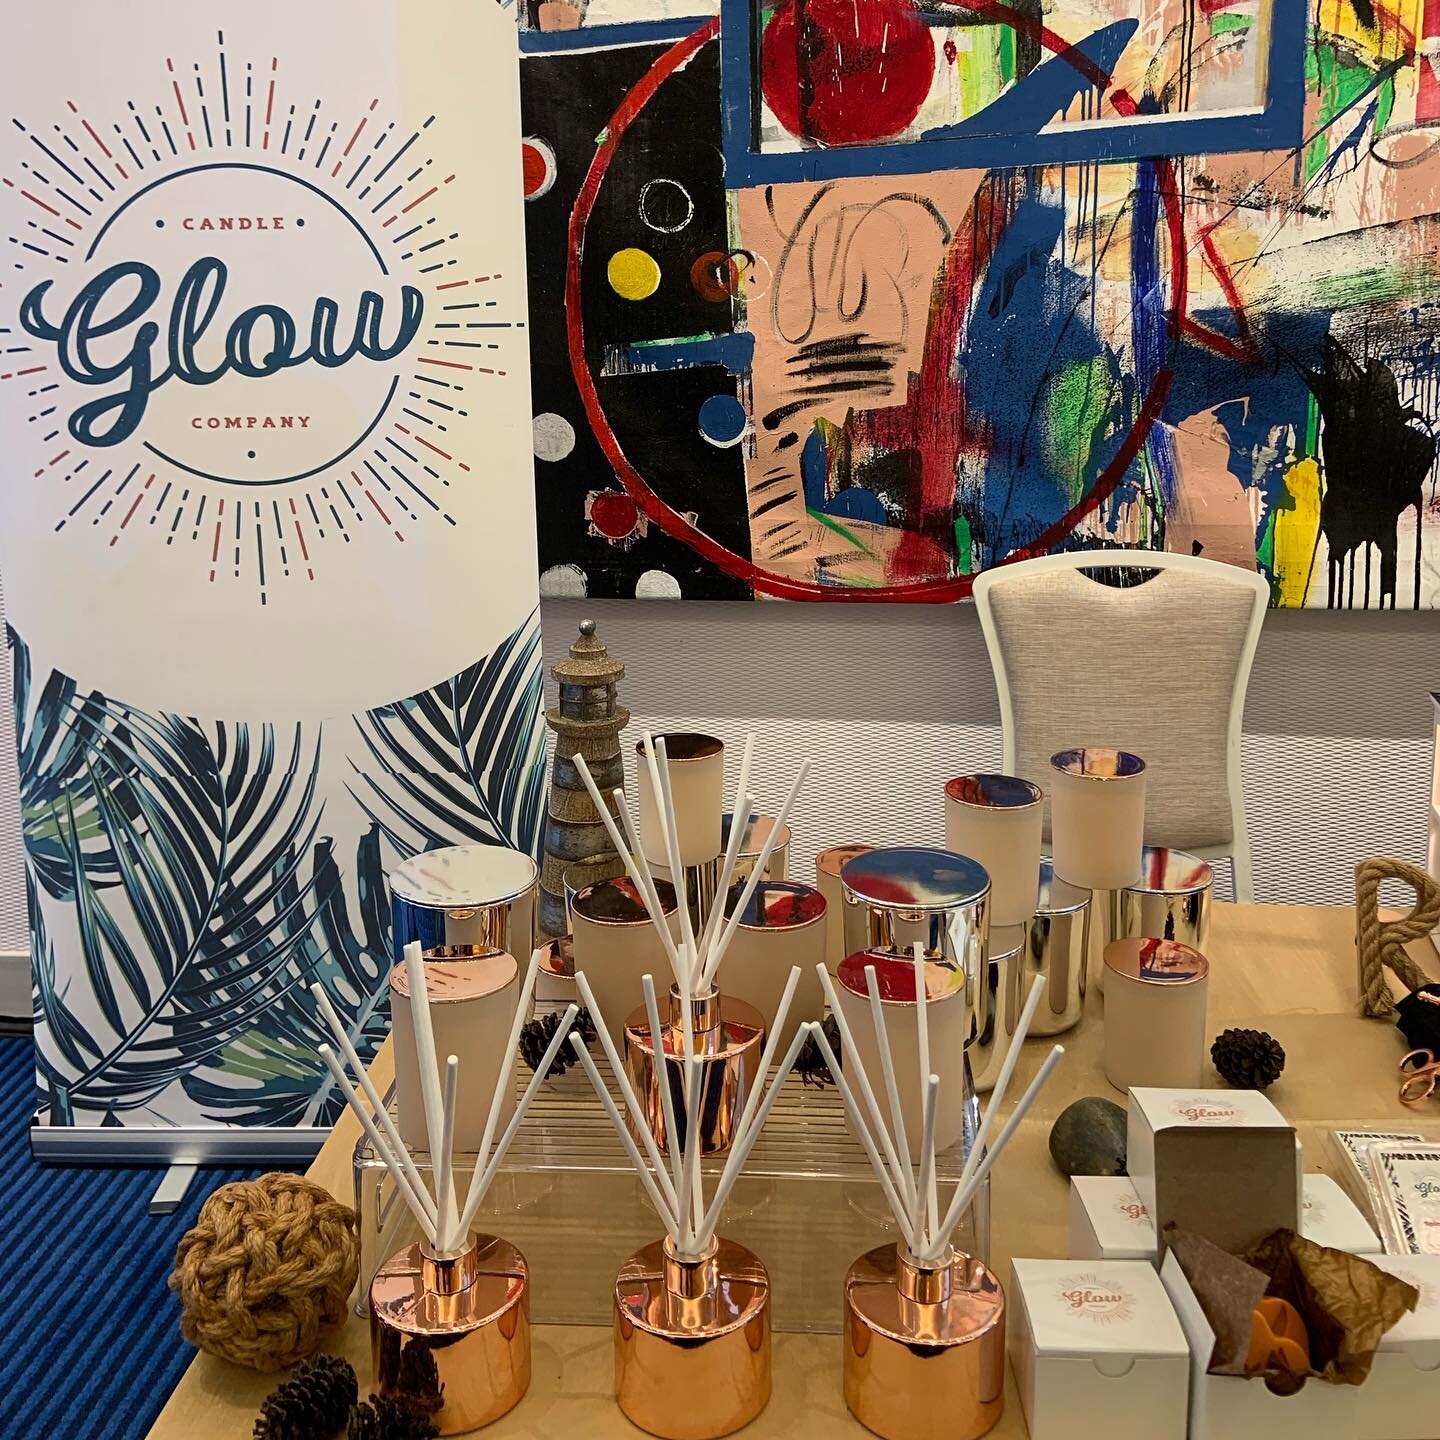 Reed Diffusers, candle care kits (wick trimmer, dipper and snuffer), wax melts, wax warmers, we&rsquo;ve got it!

#glowcandlecompany #waxmelts #reeddiffusers #glowsignature #glowluxe #bahamascandle #glowgifts #candlestagram #bahamiangifts #giftboutiq